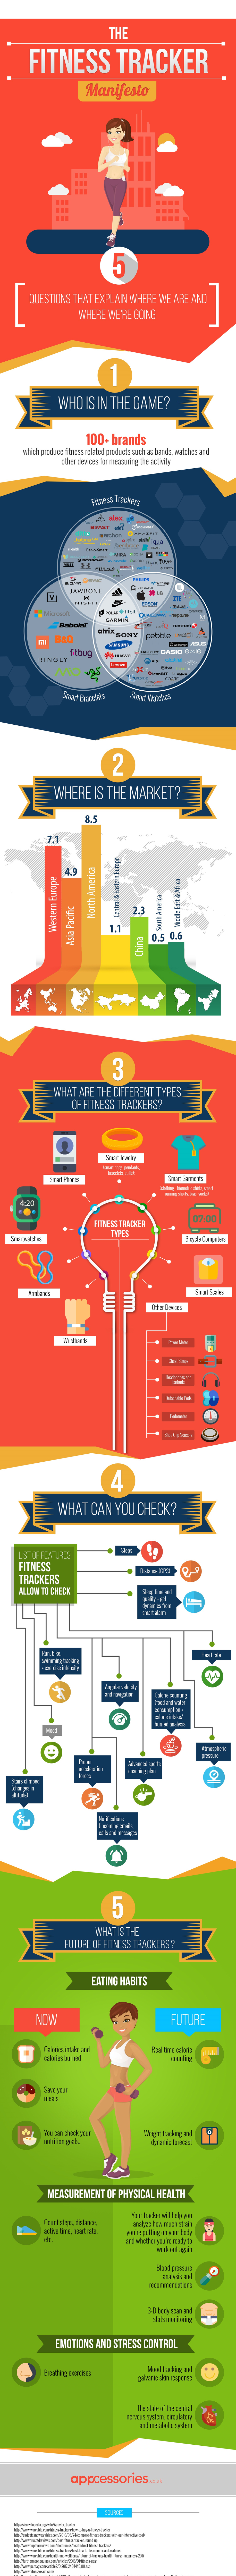 fitness-tracker-infographic